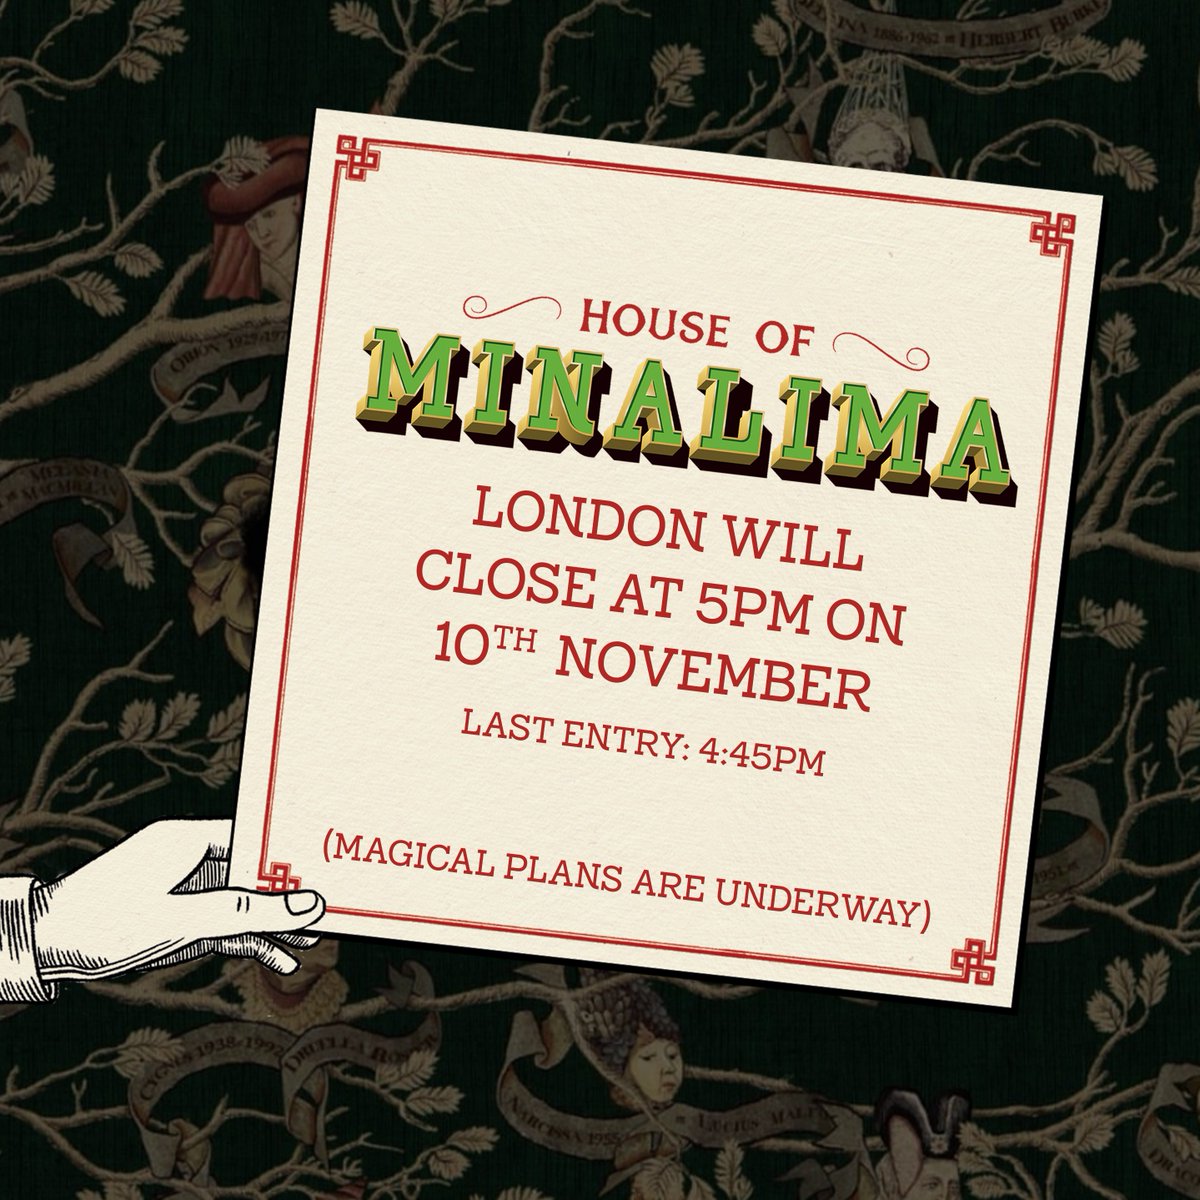 On Friday 10th November, House of MinaLima London will close at 5PM with last entry at 4:45PM. Normal opening hours will resume after this date. ✨⁠